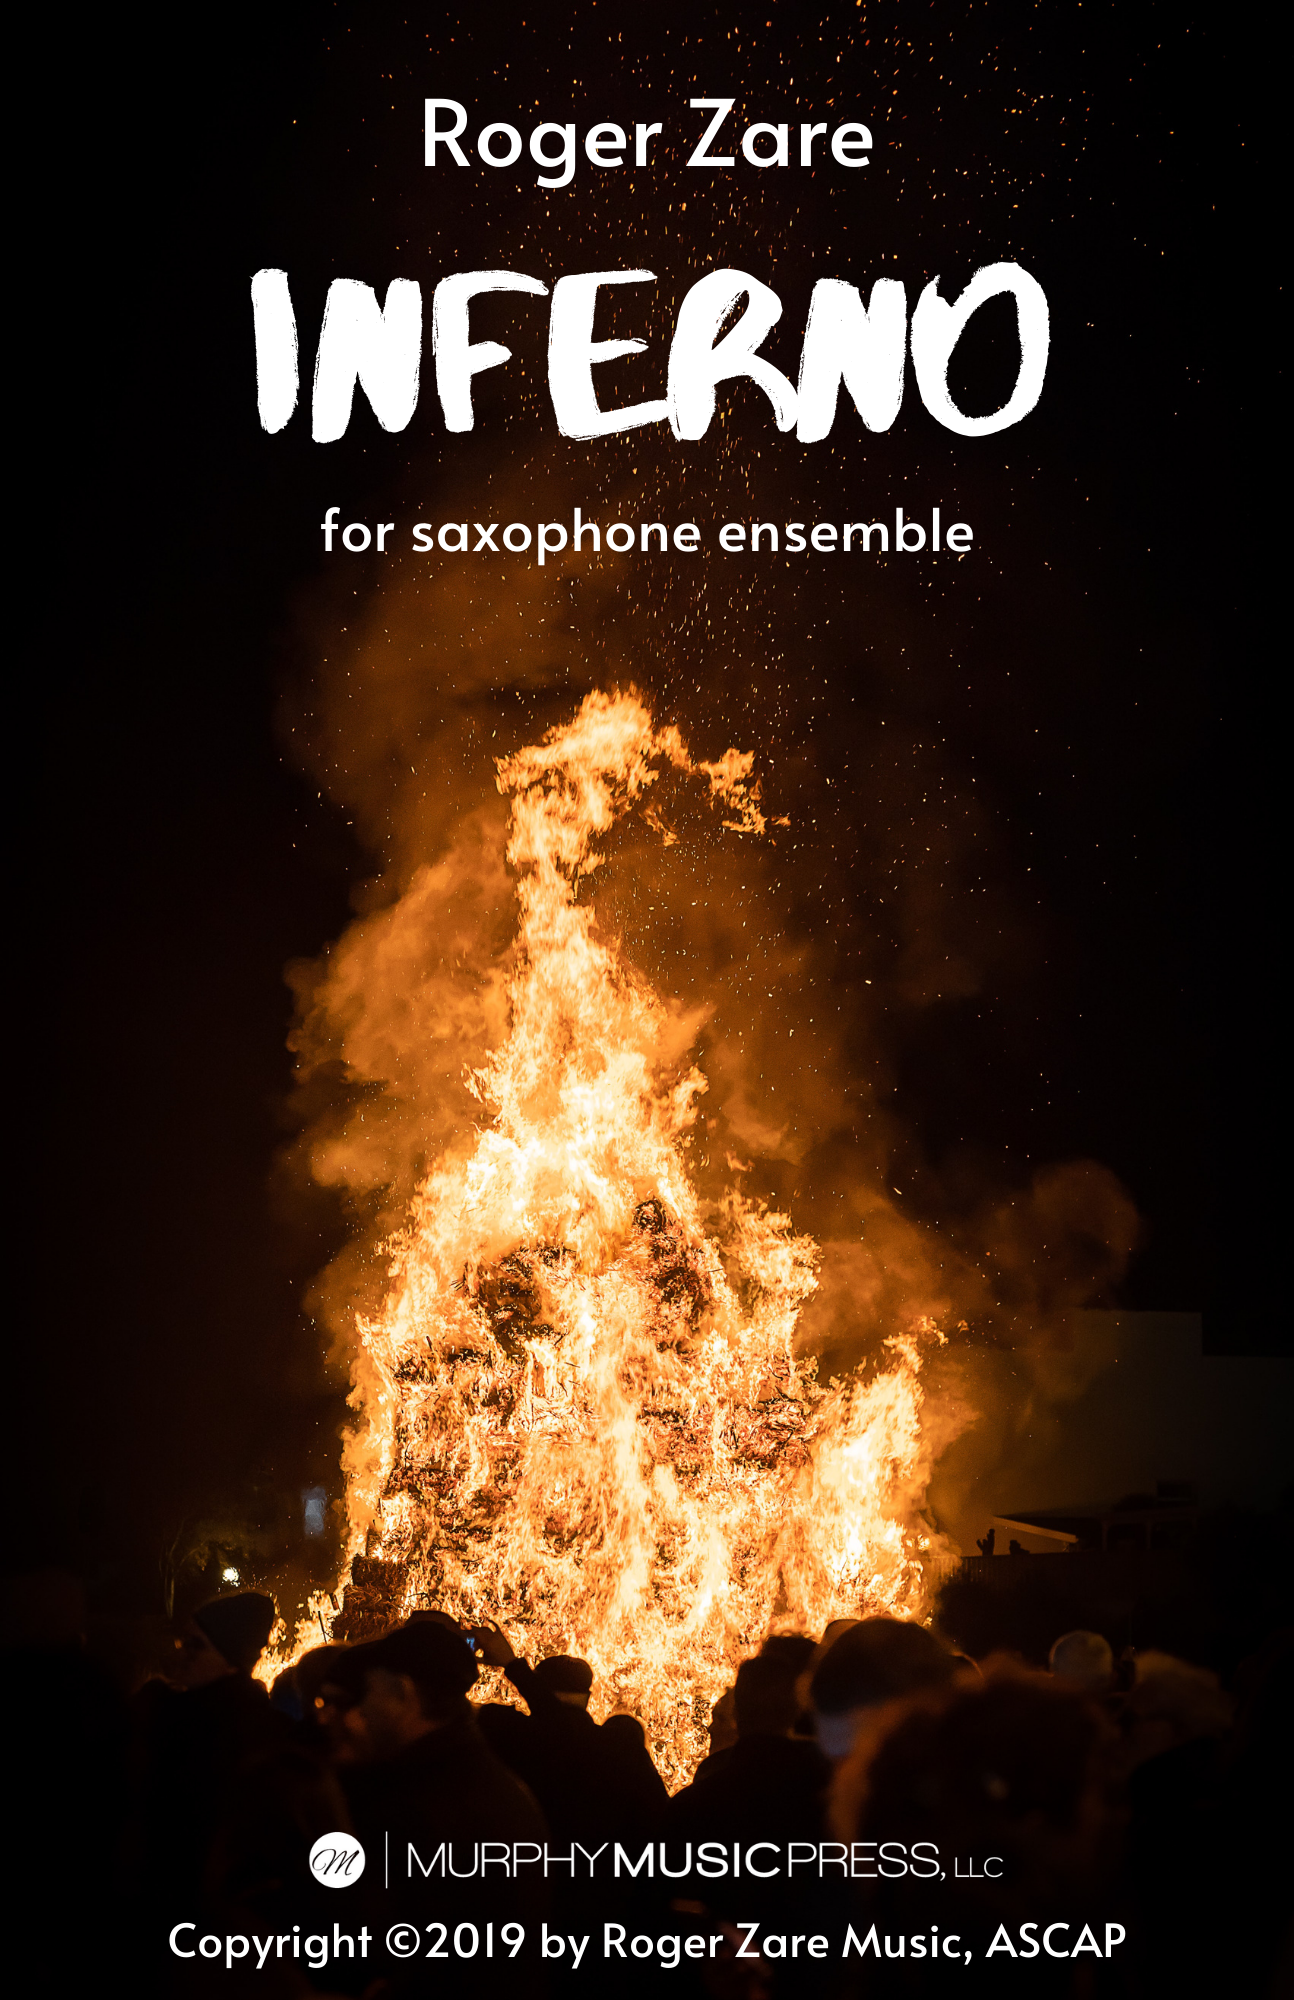 Inferno by Roger Zare